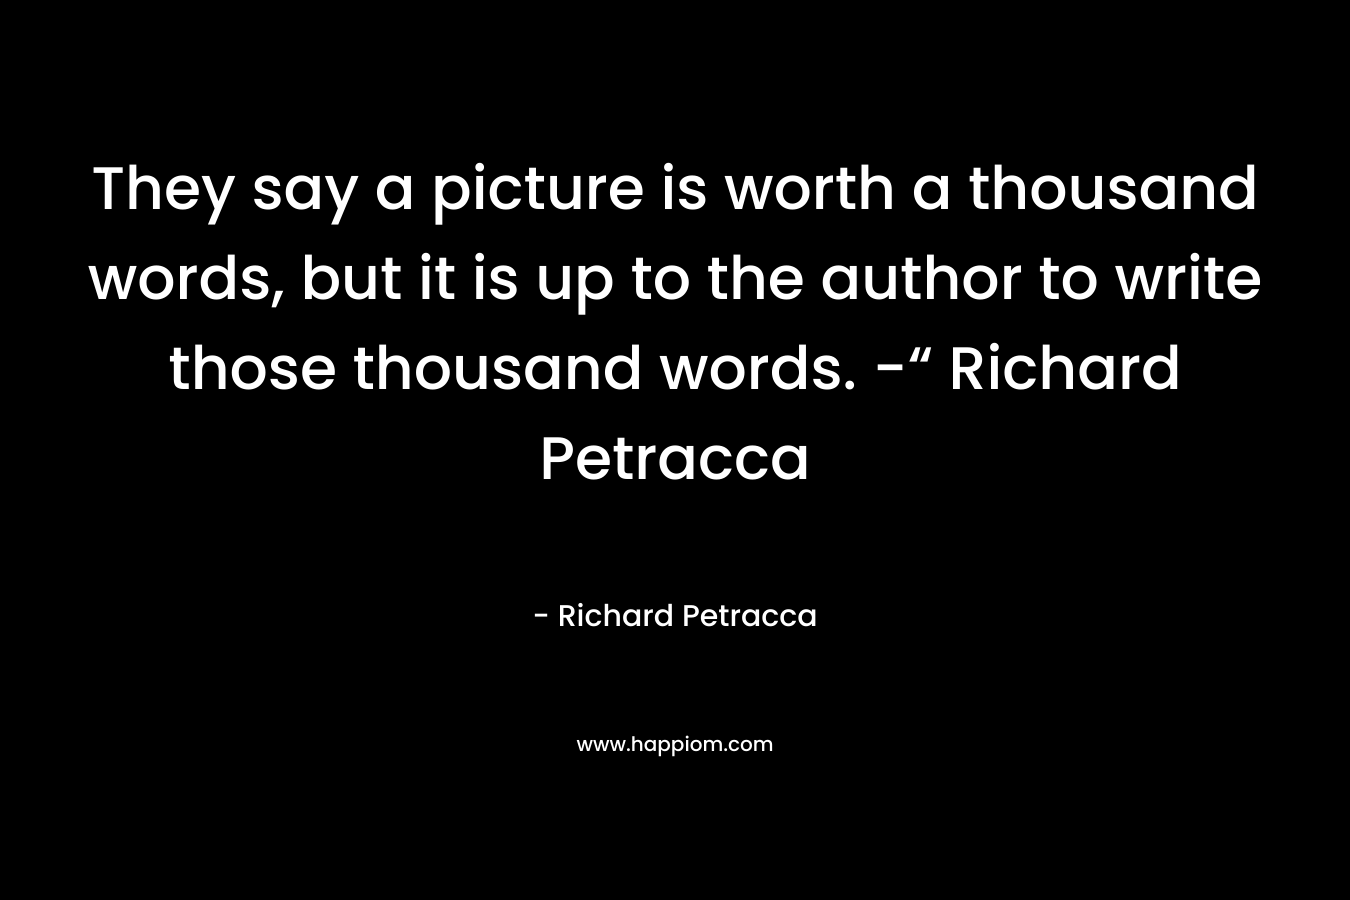 They say a picture is worth a thousand words, but it is up to the author to write those thousand words. -“ Richard Petracca